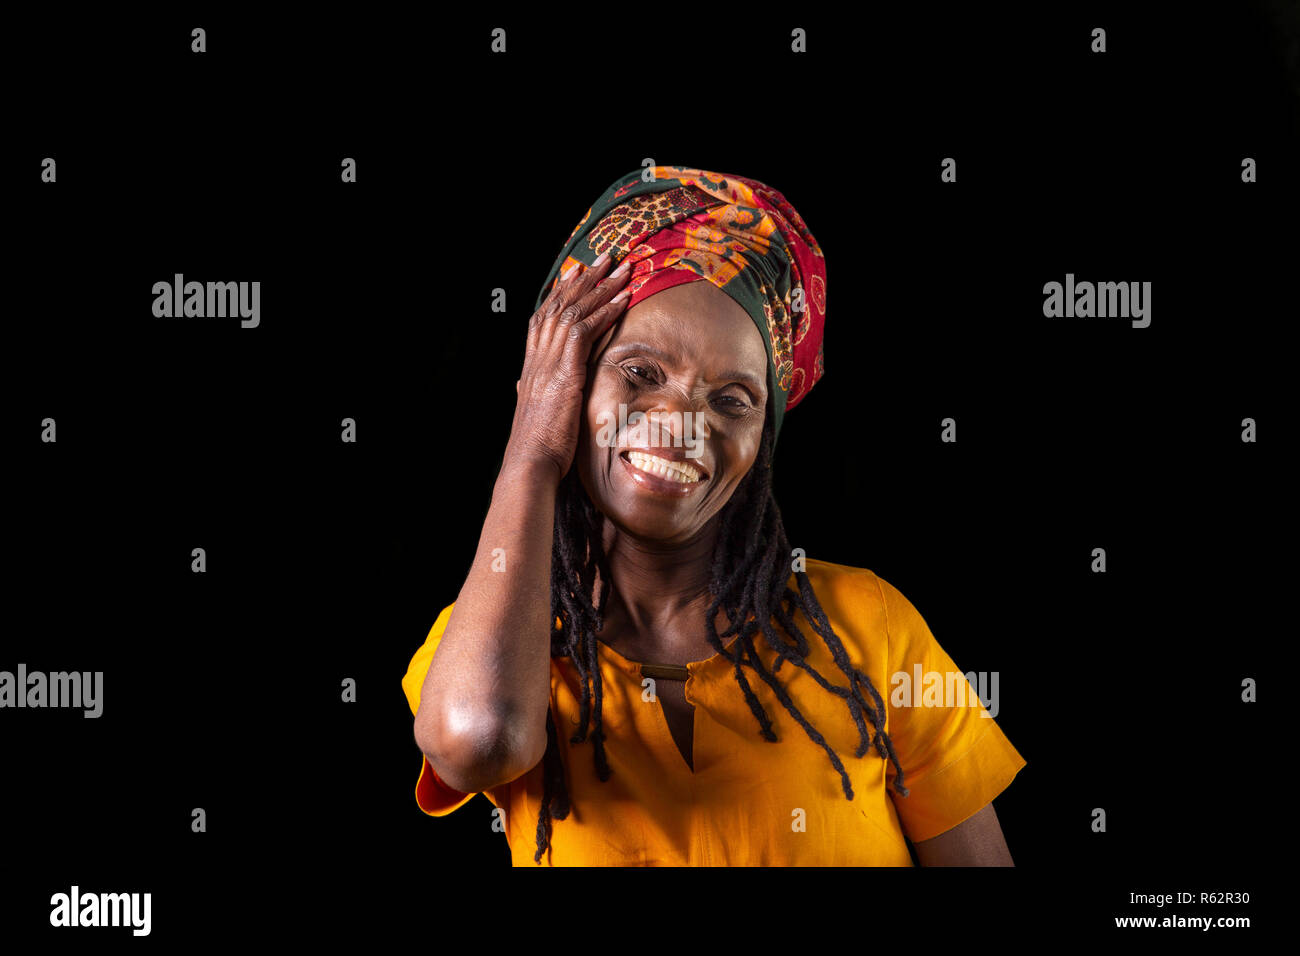 Closeup of an elderly African woman smiling and wearing a headscarf against a black background Stock Photo